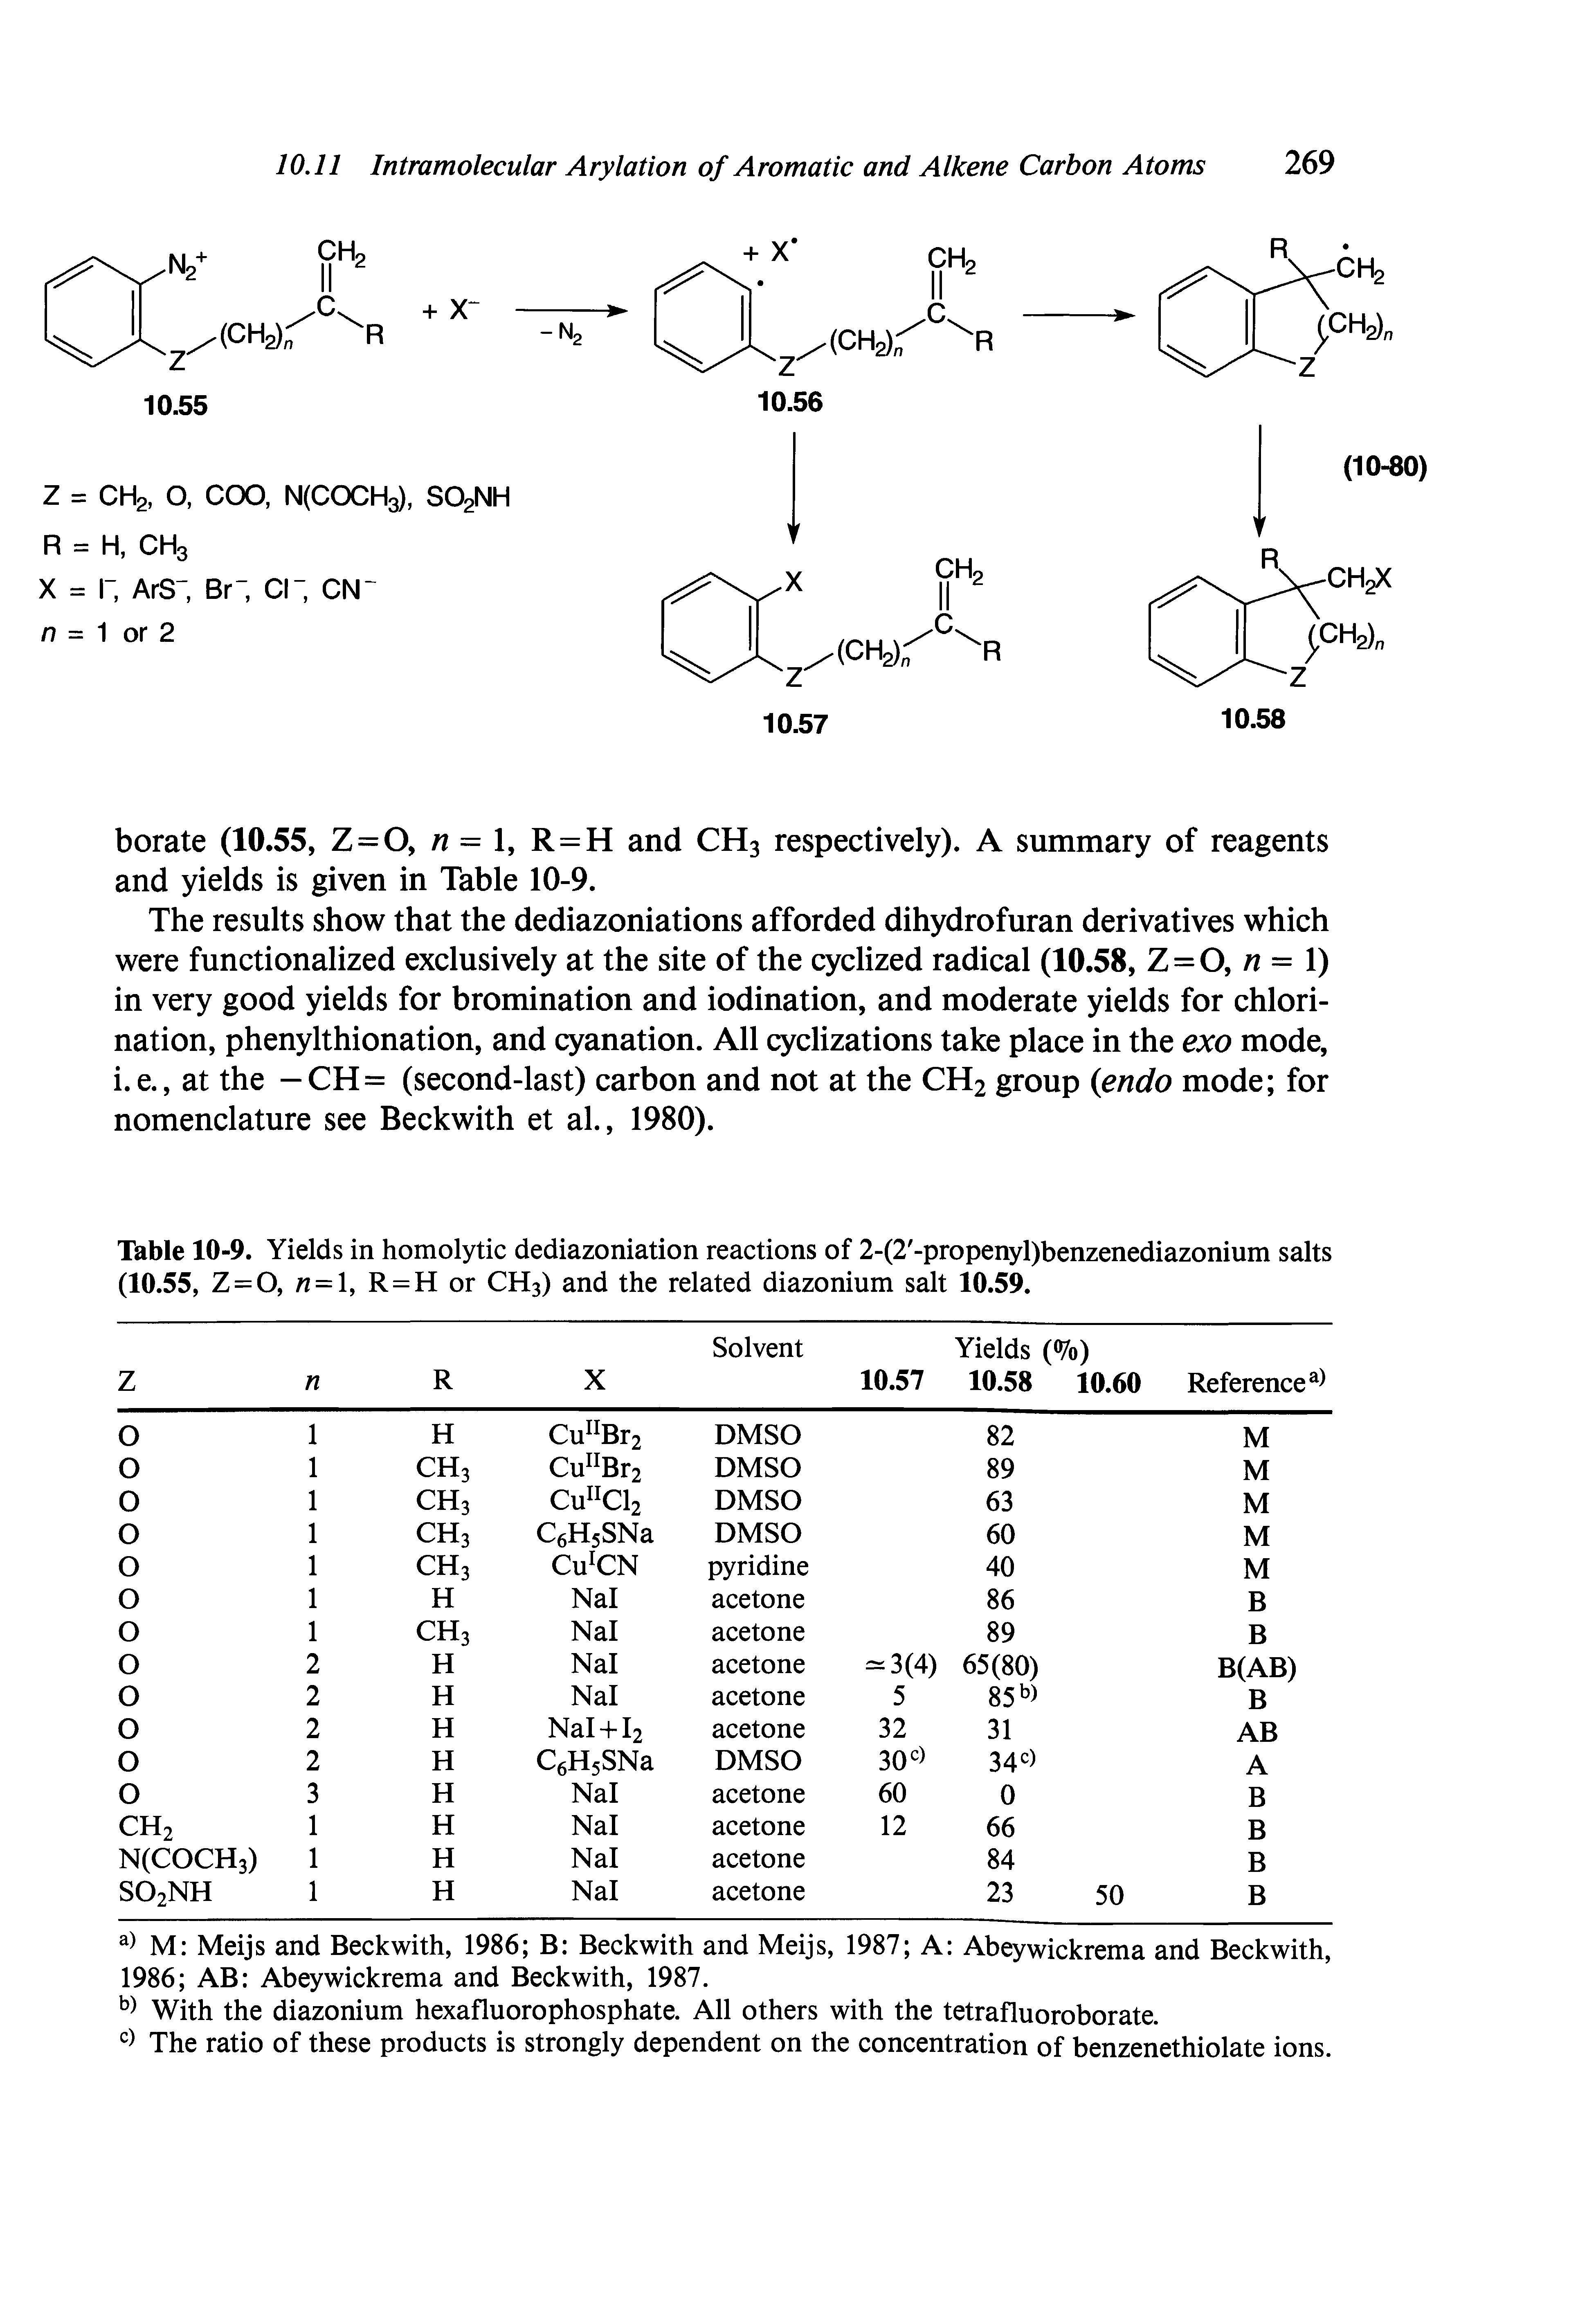 Table 10-9. Yields in homolytic dediazoniation reactions of 2-(2 -propenyl)benzenediazonium salts (10.55, Z = 0, 7i = l, R=H or CH3) and the related diazonium salt 10.59.